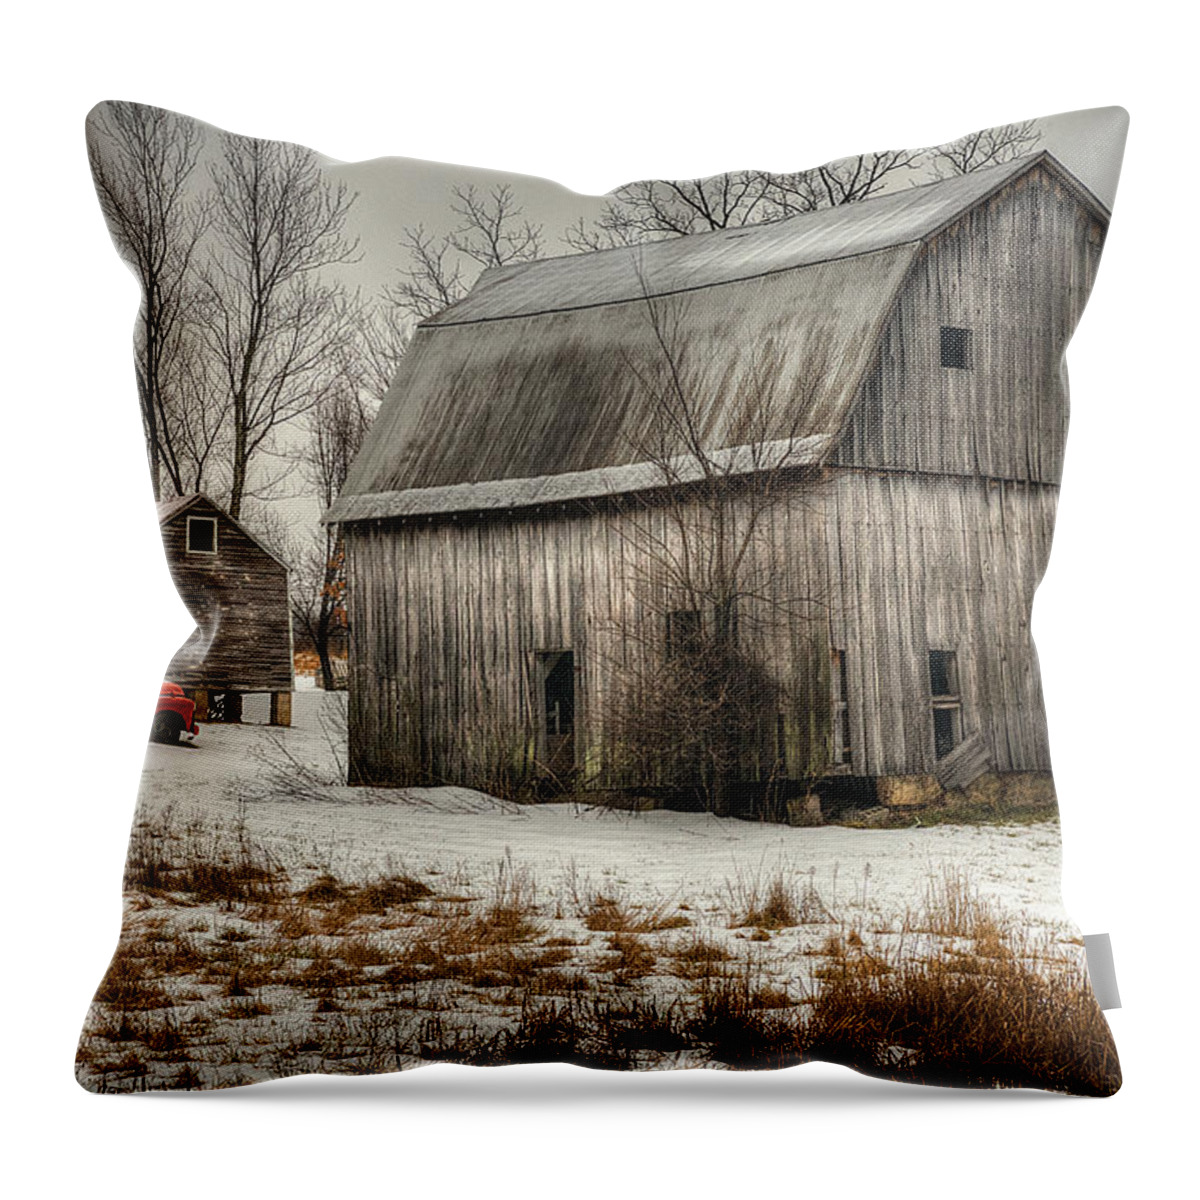 Ghosts Of Farmers Give Their Blessing Throw Pillow featuring the photograph Ghosts of Farmers Give Their Blessing by William Fields